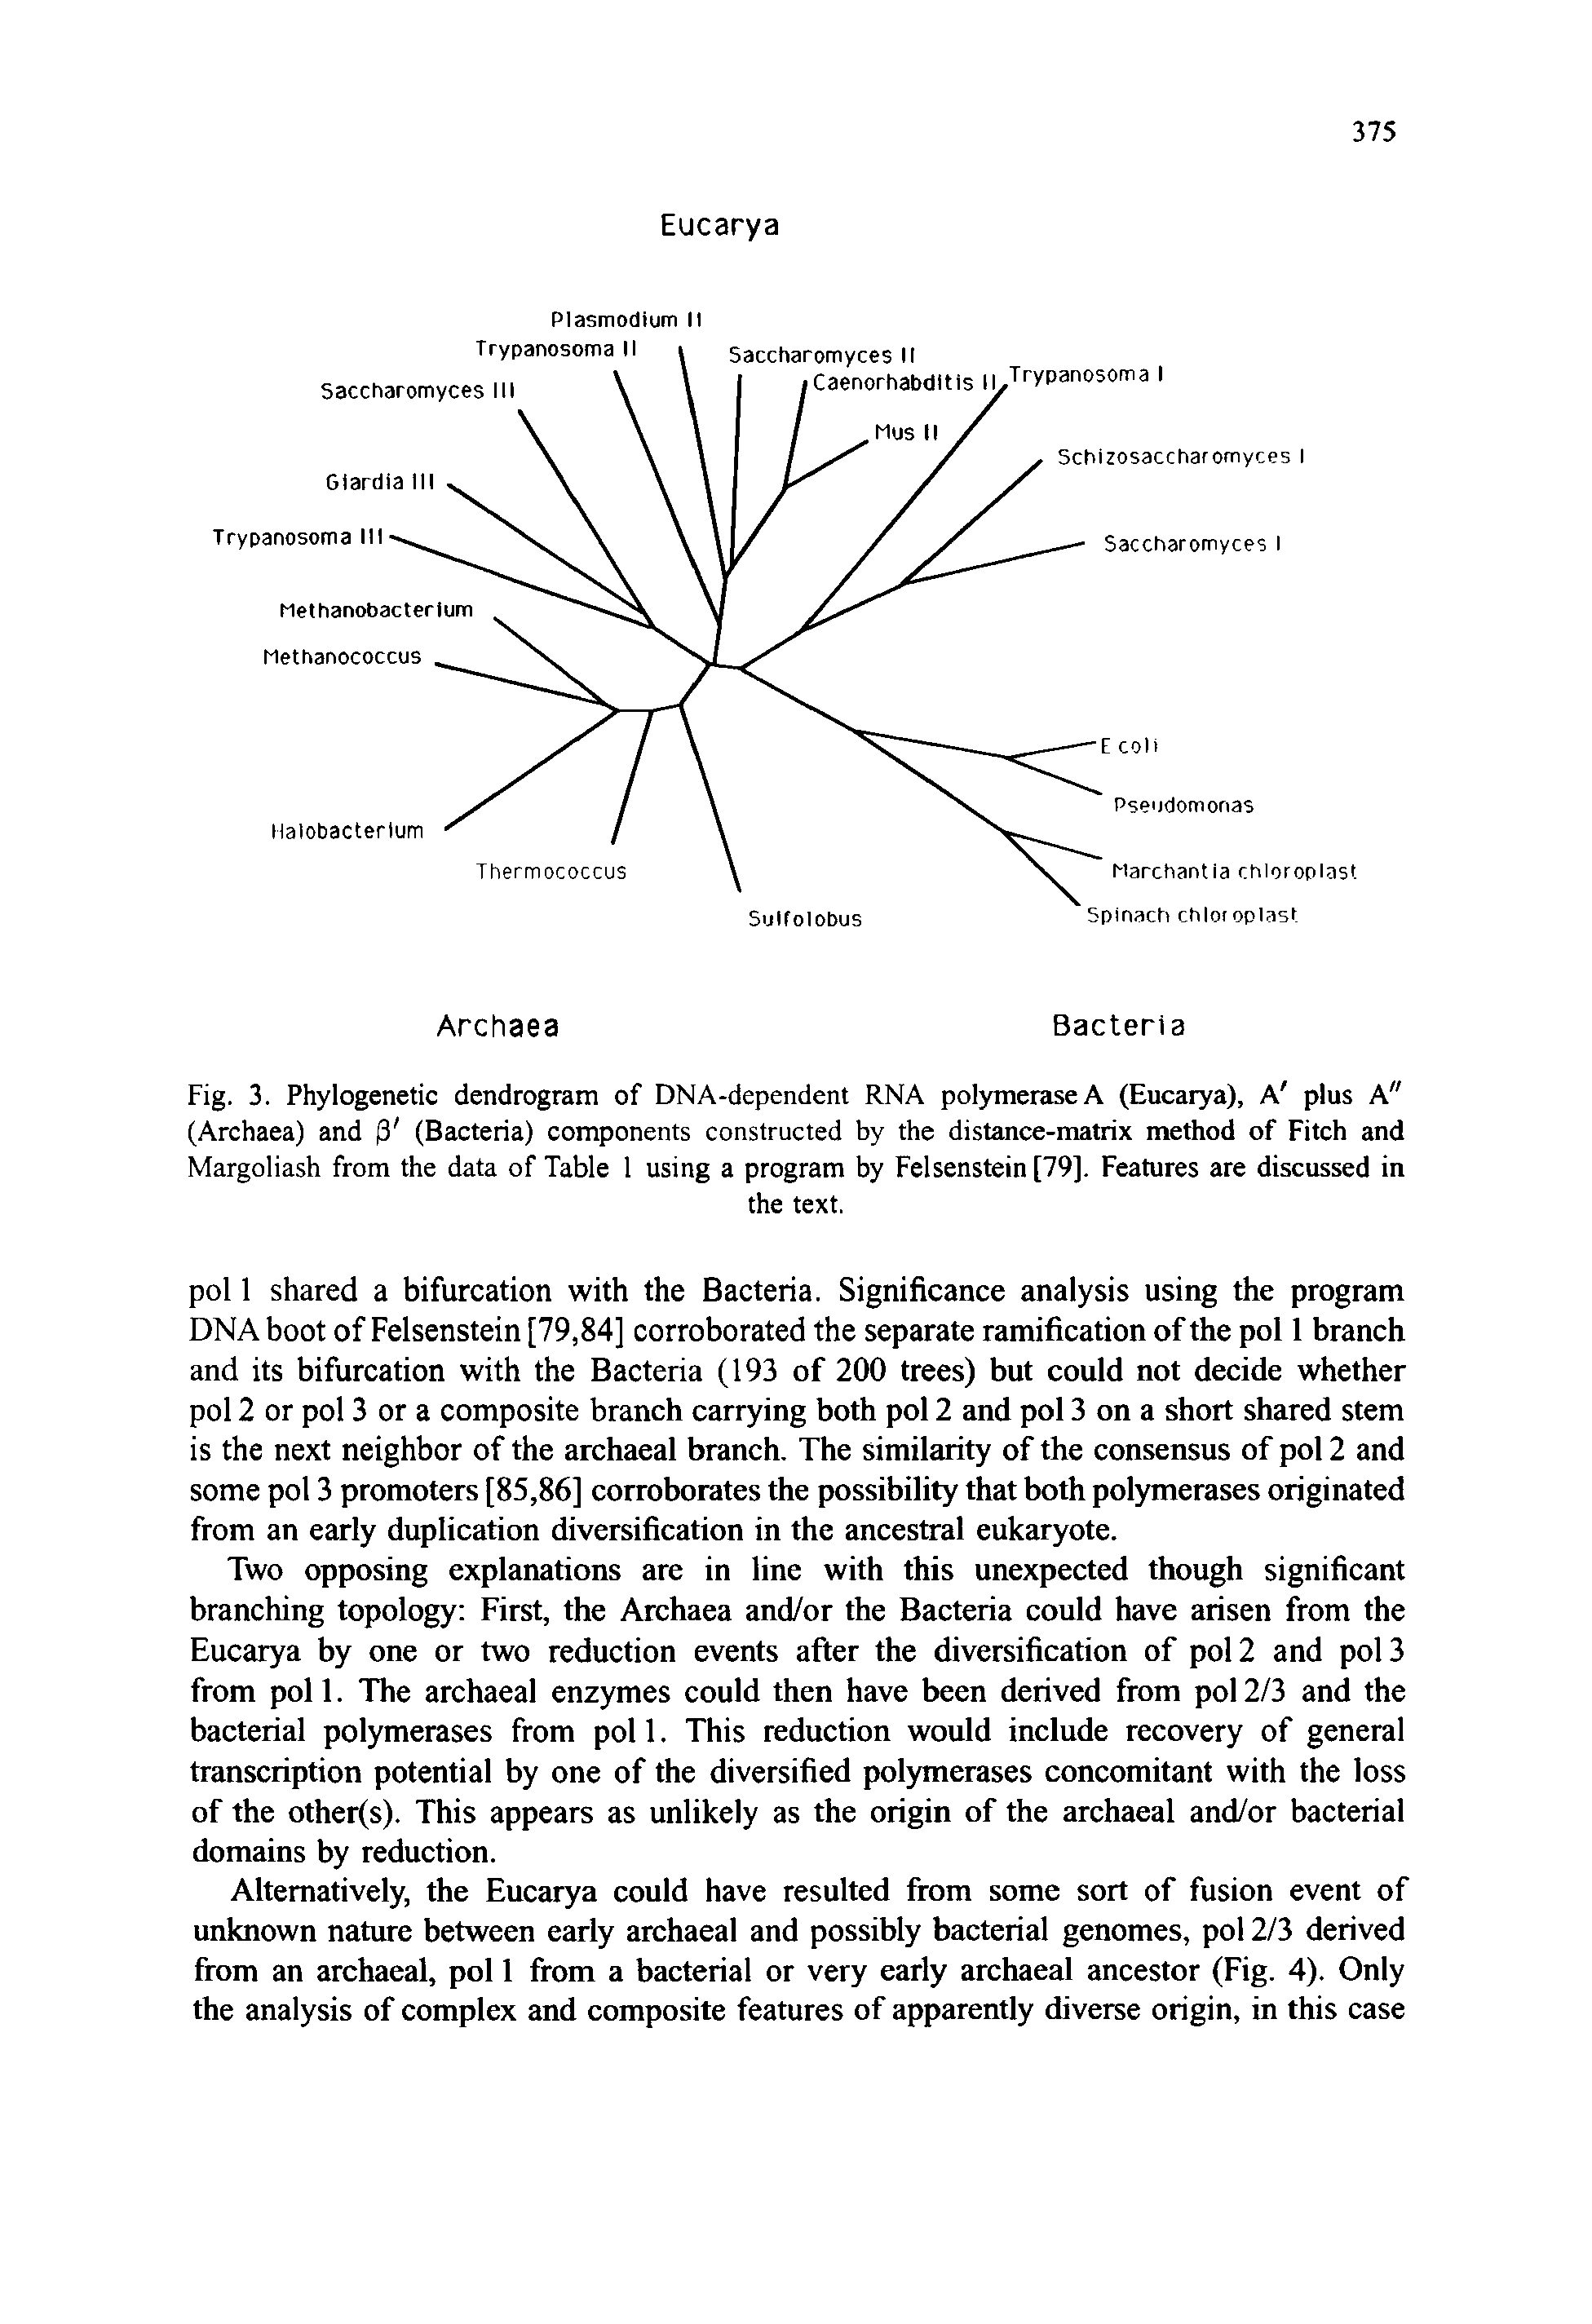 Fig. 3. Phylogenetic dendrogram of DNA-dependent RNA polymerase A (Eucarya), A plus A" (Archaea) and 3 (Bacteria) components constructed by the distance-matrix method of Fitch and Margoliash from the data of Table 1 using a program by Felsenstein [79]. Features are discussed in...